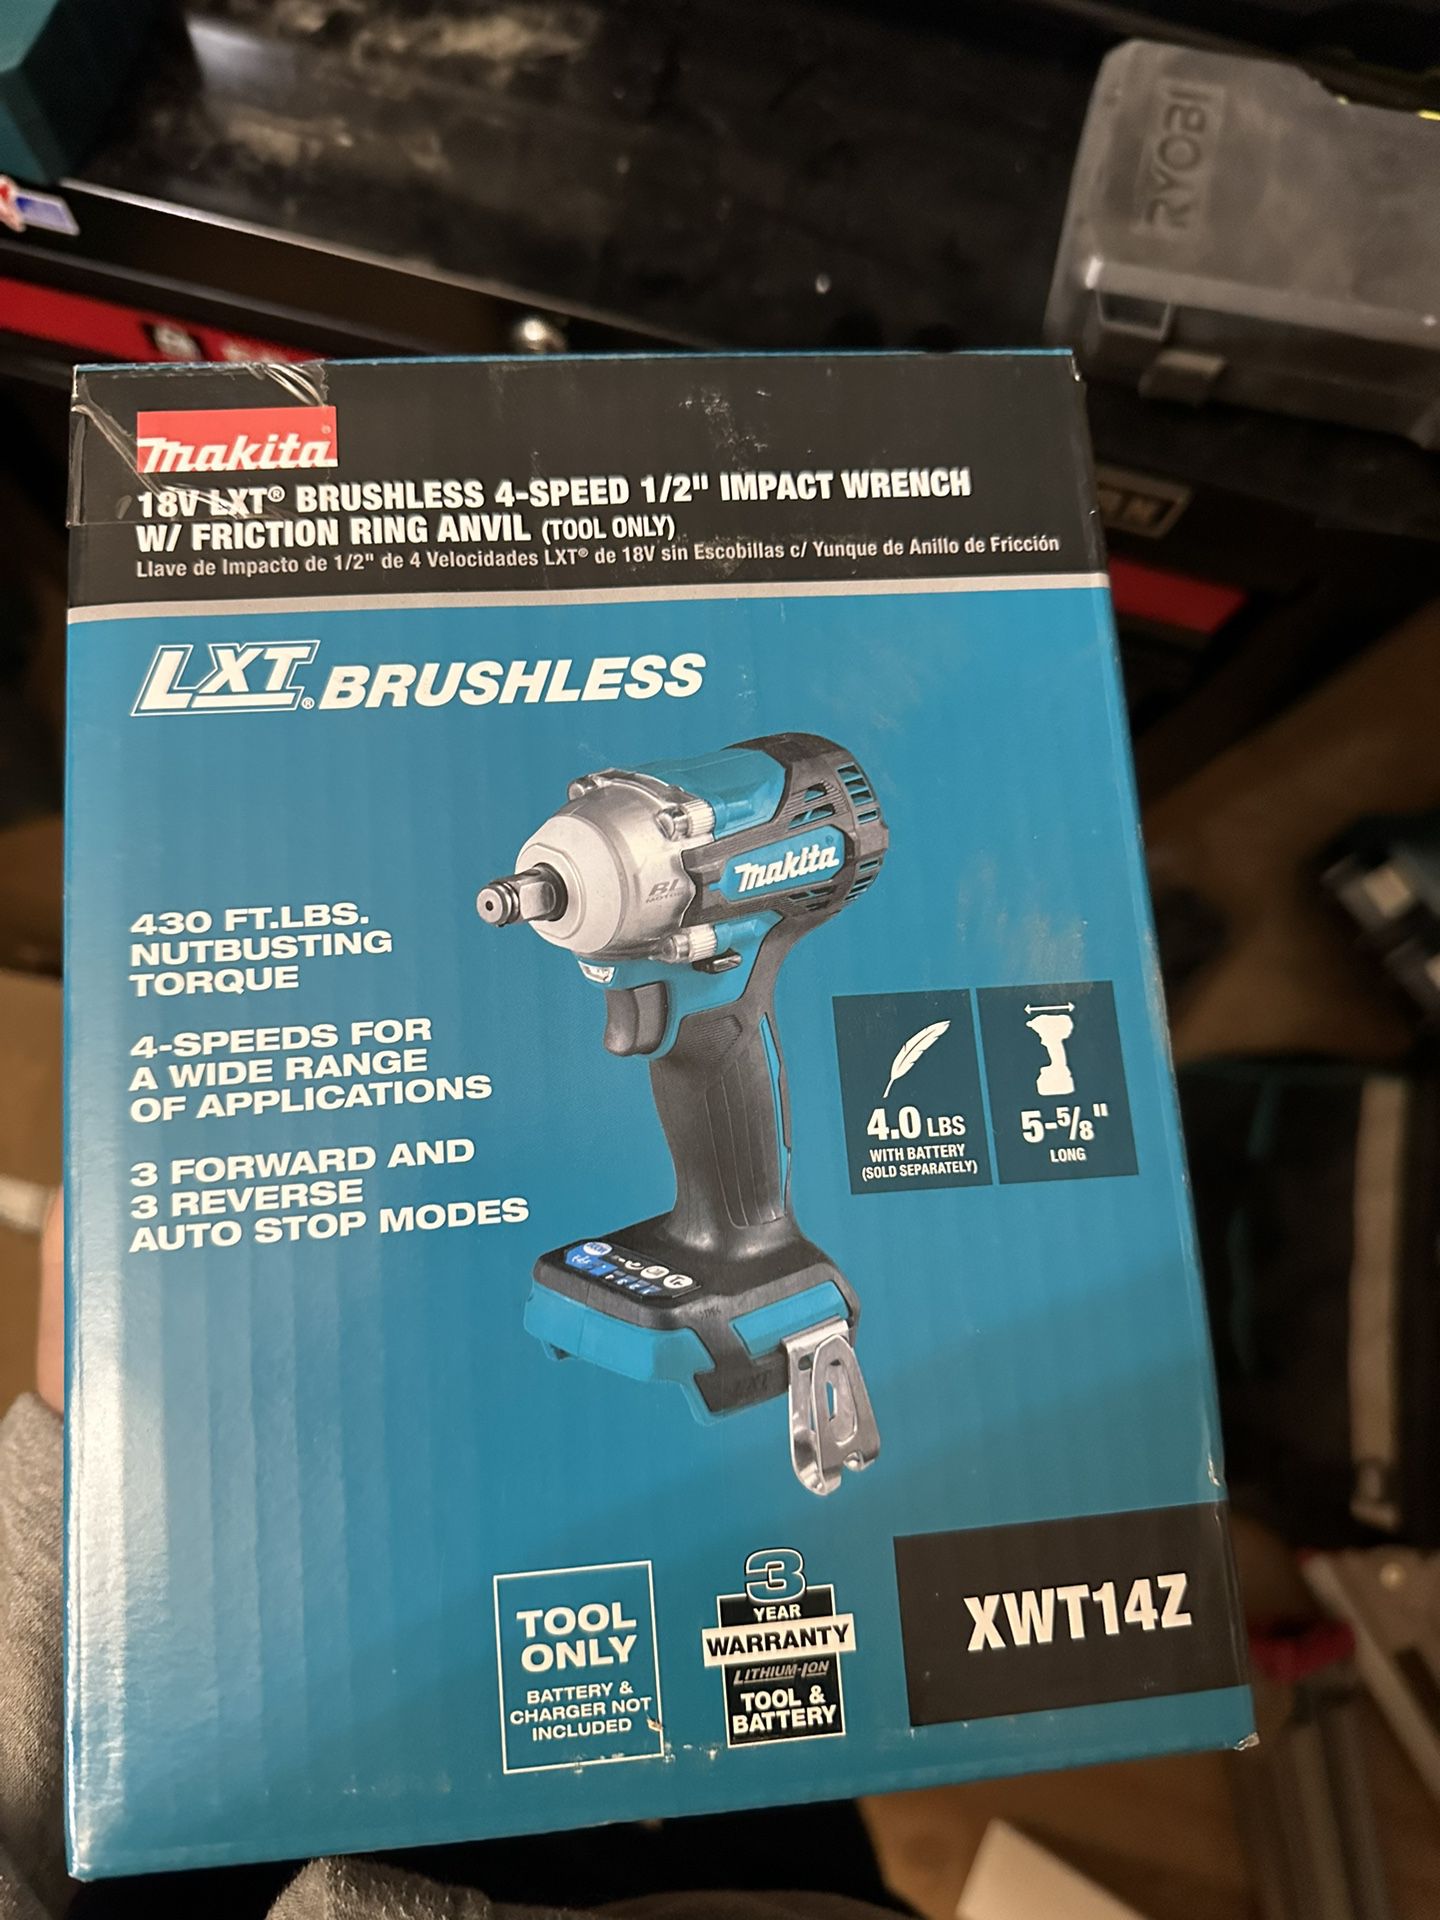 18V LXT Lithium-Ion Brushless Cordless 4-Speed 1/2 in. Impact Wrench with Detent Anvil (Tool-Only)